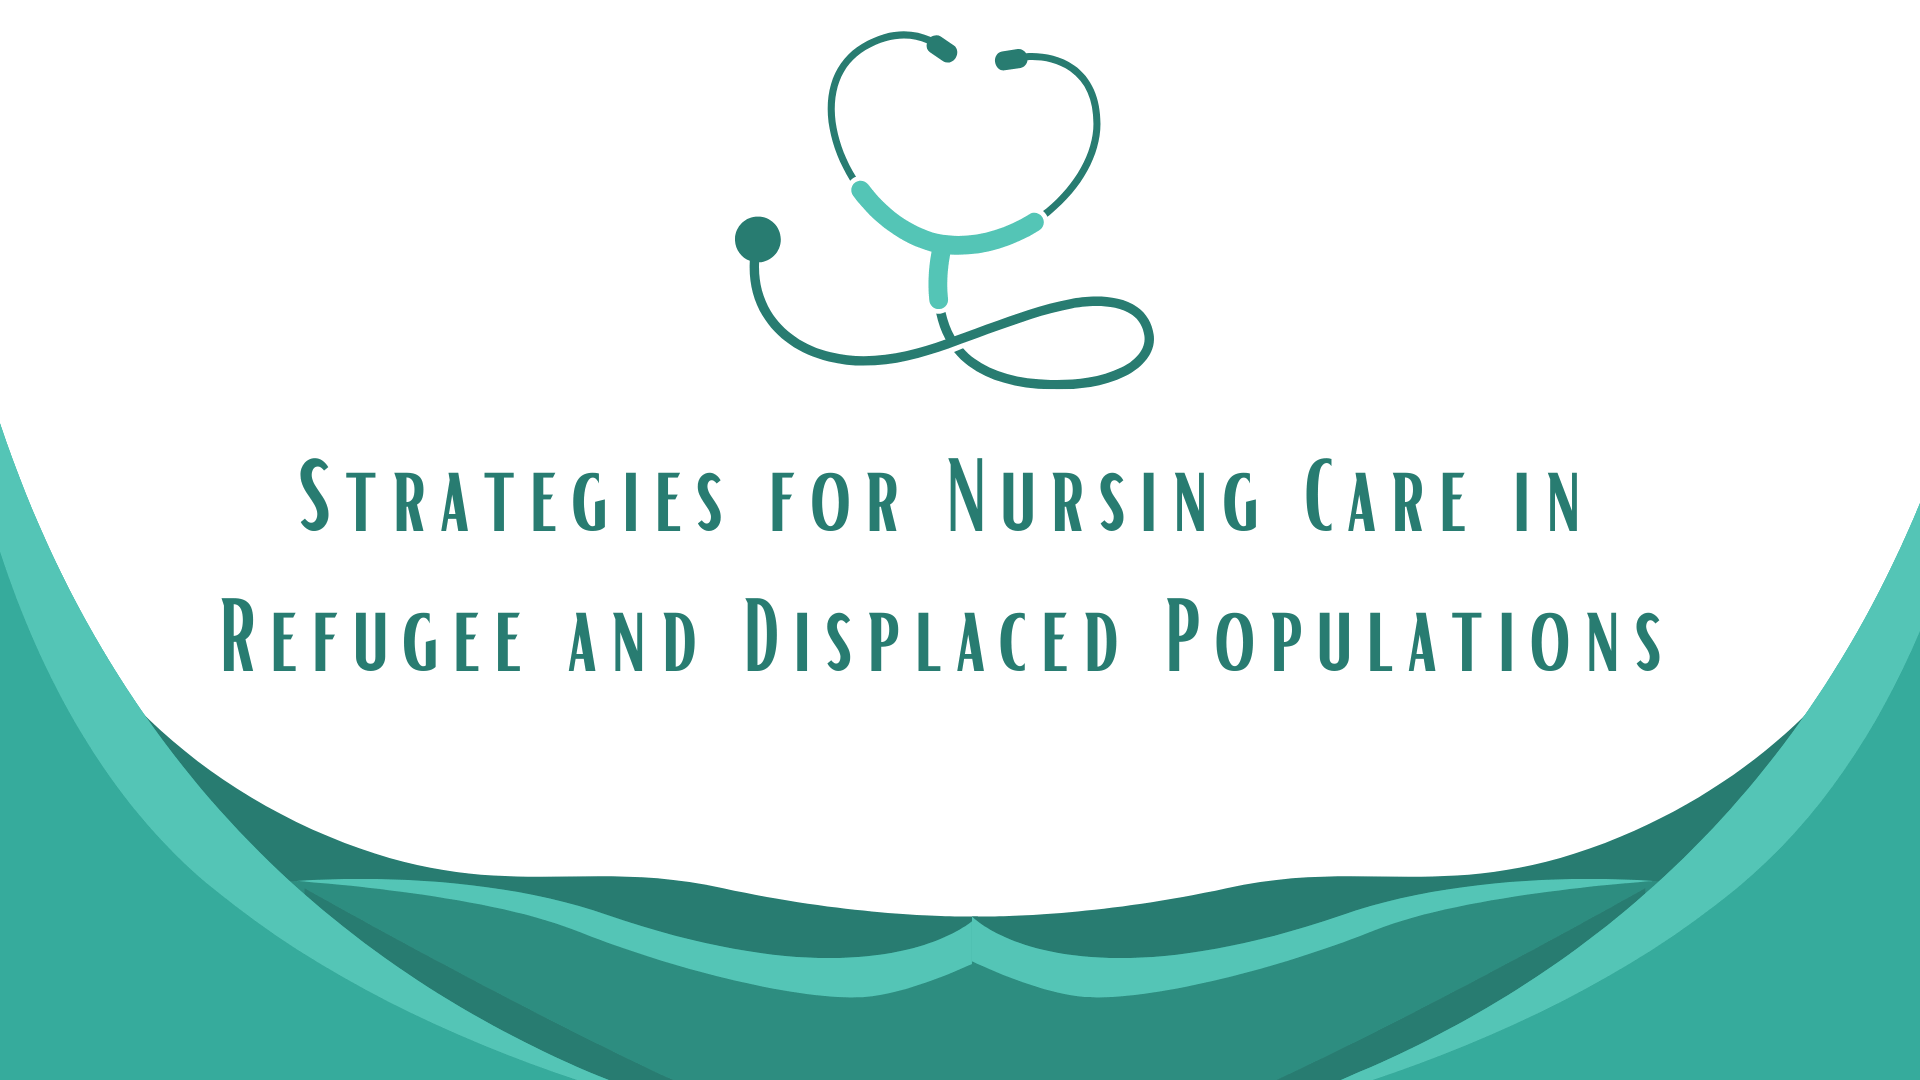 Strategies for Nursing Care in Refugee and Displaced Populations